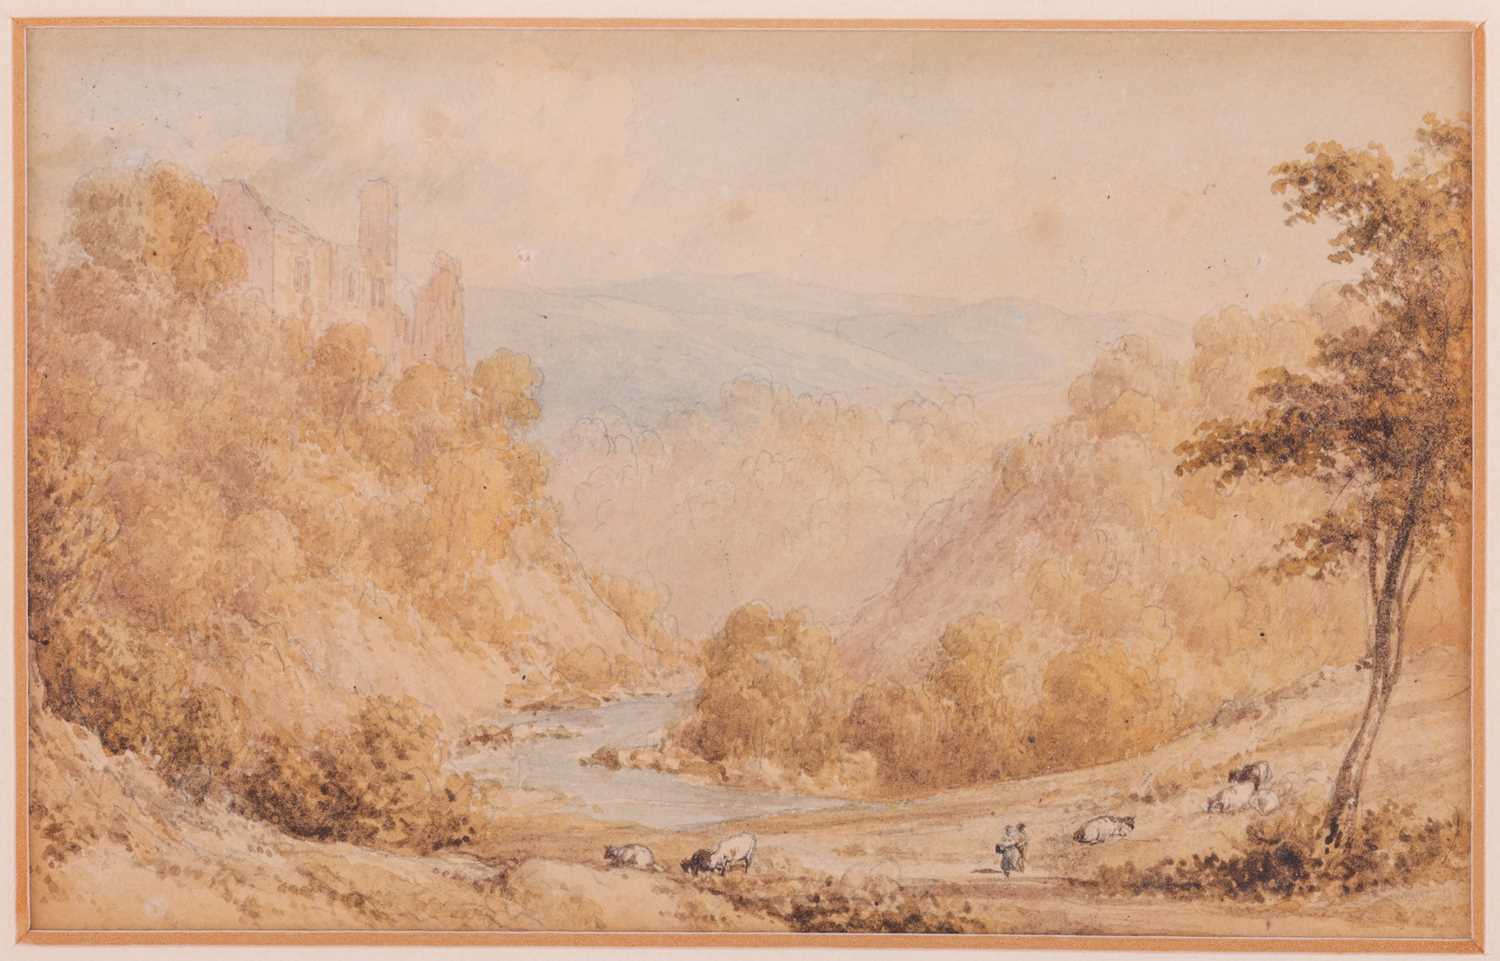 William Westall (1781 - 1850), 'Berry Pomeroy Castle' and 'Shaugh Bridge on the River Plym, Devonshi - Image 3 of 7